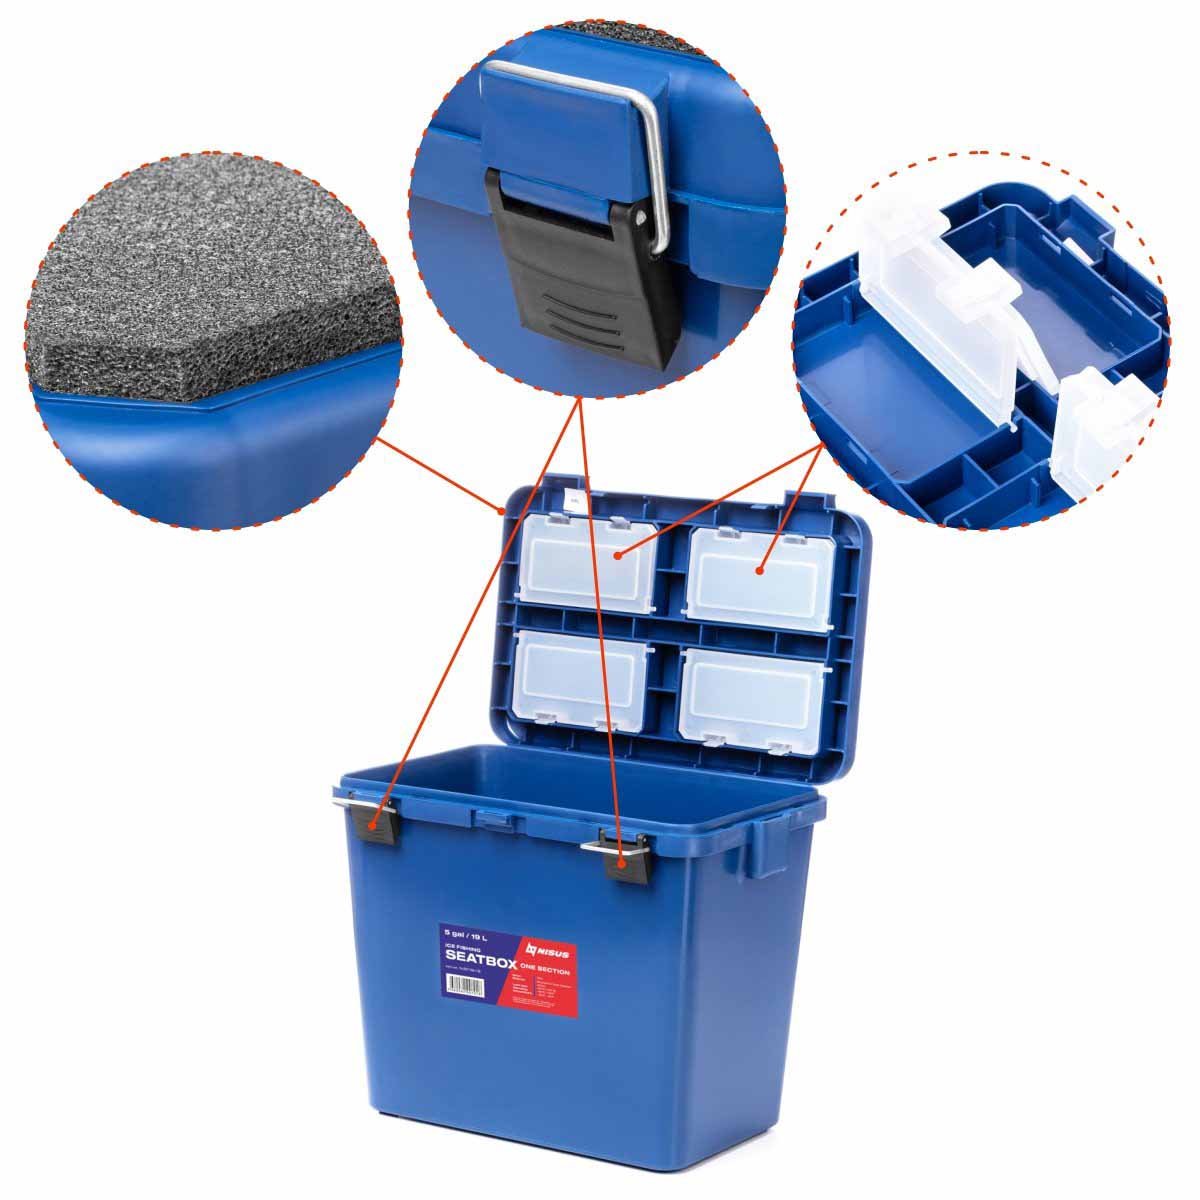 Ice Fishing Bucket Type Box with Seat and Adjustable Shoulder Strap is equiped with locks and plastic boxes for easy storage